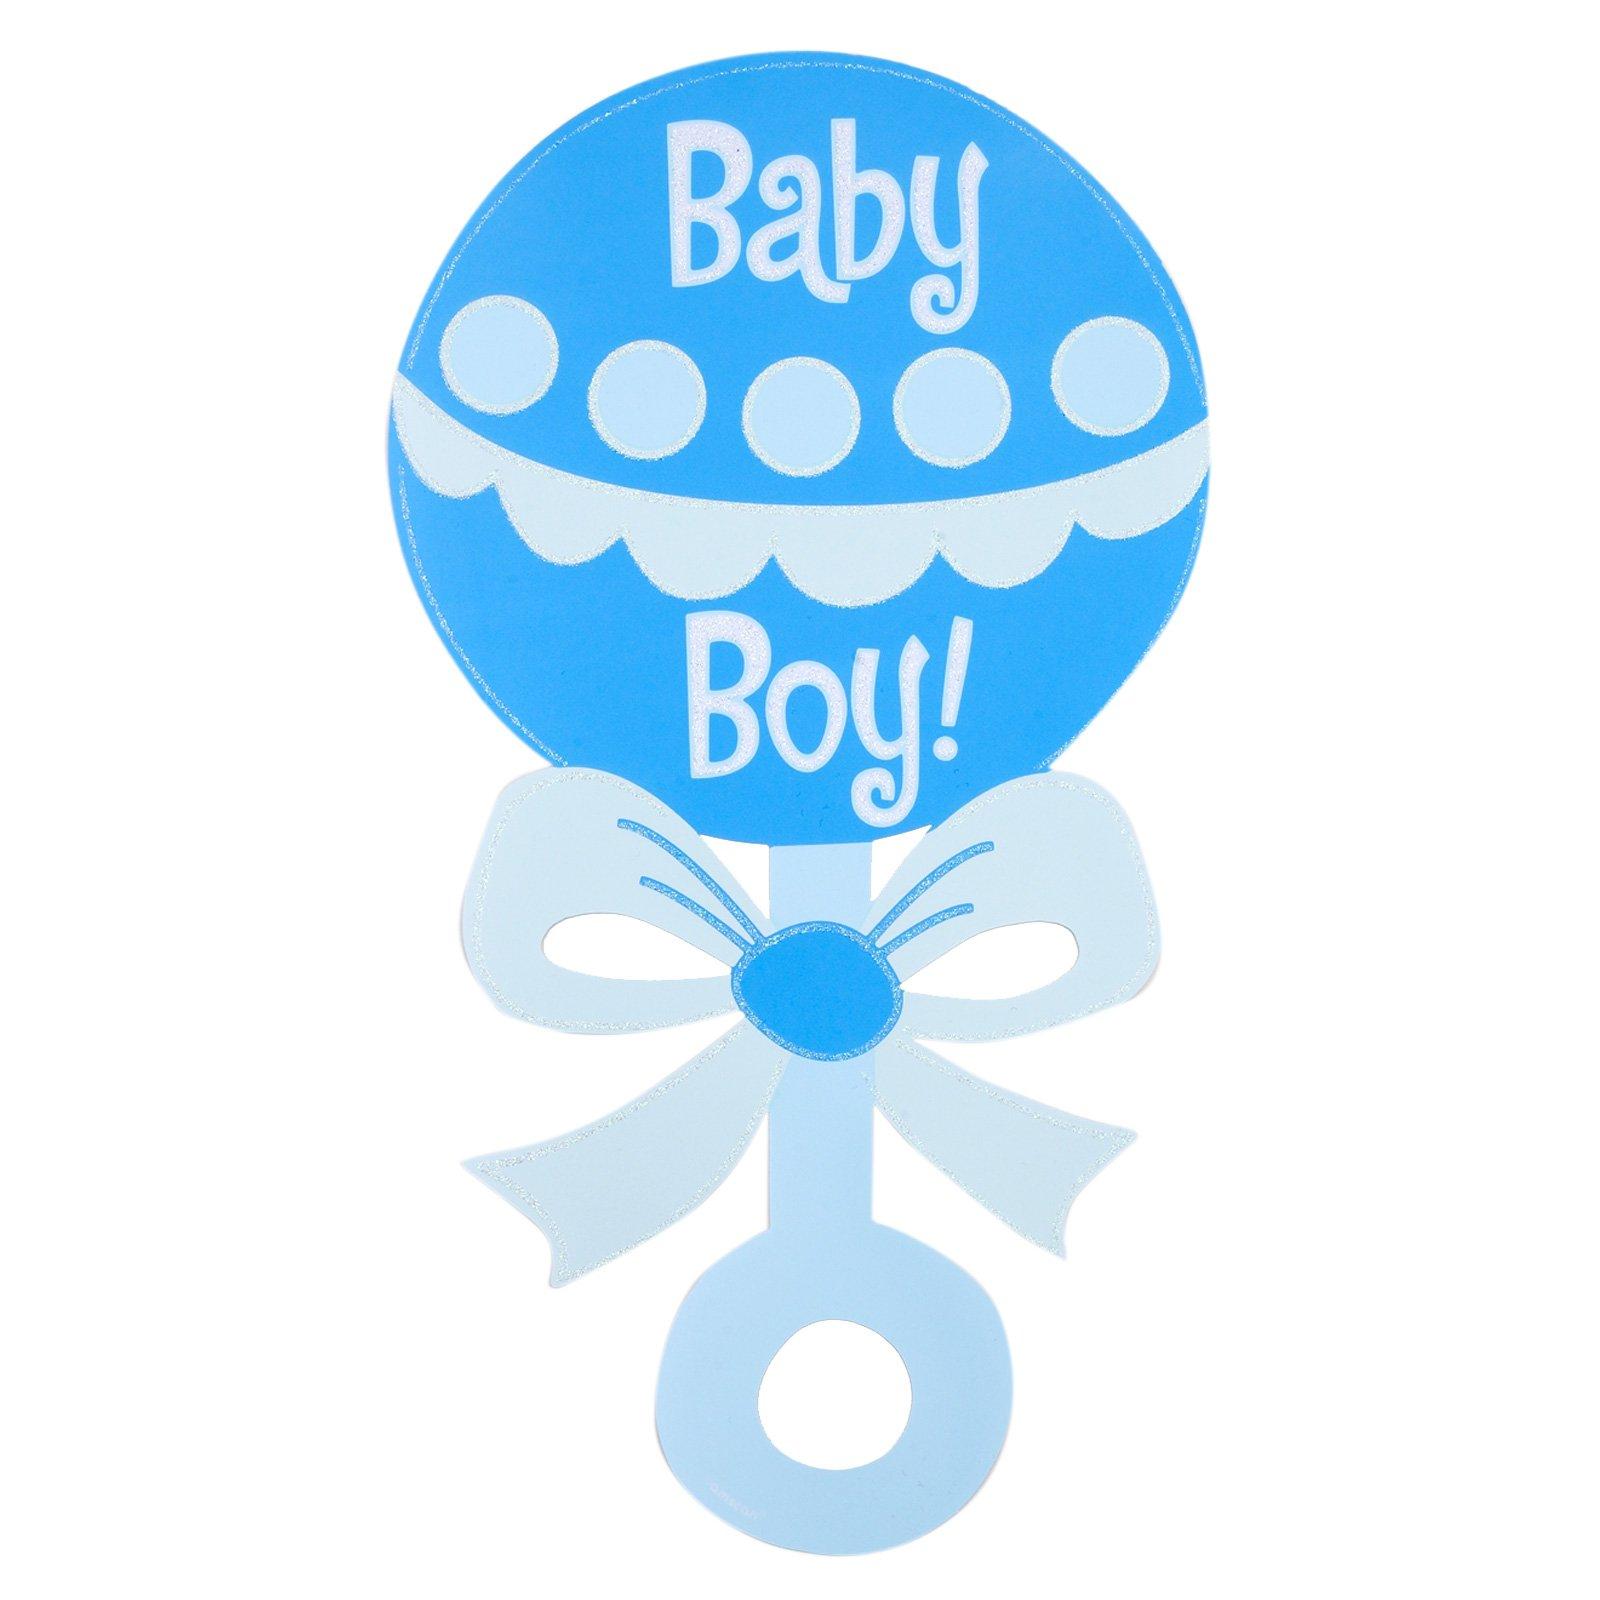 free clipart baby toys - photo #39